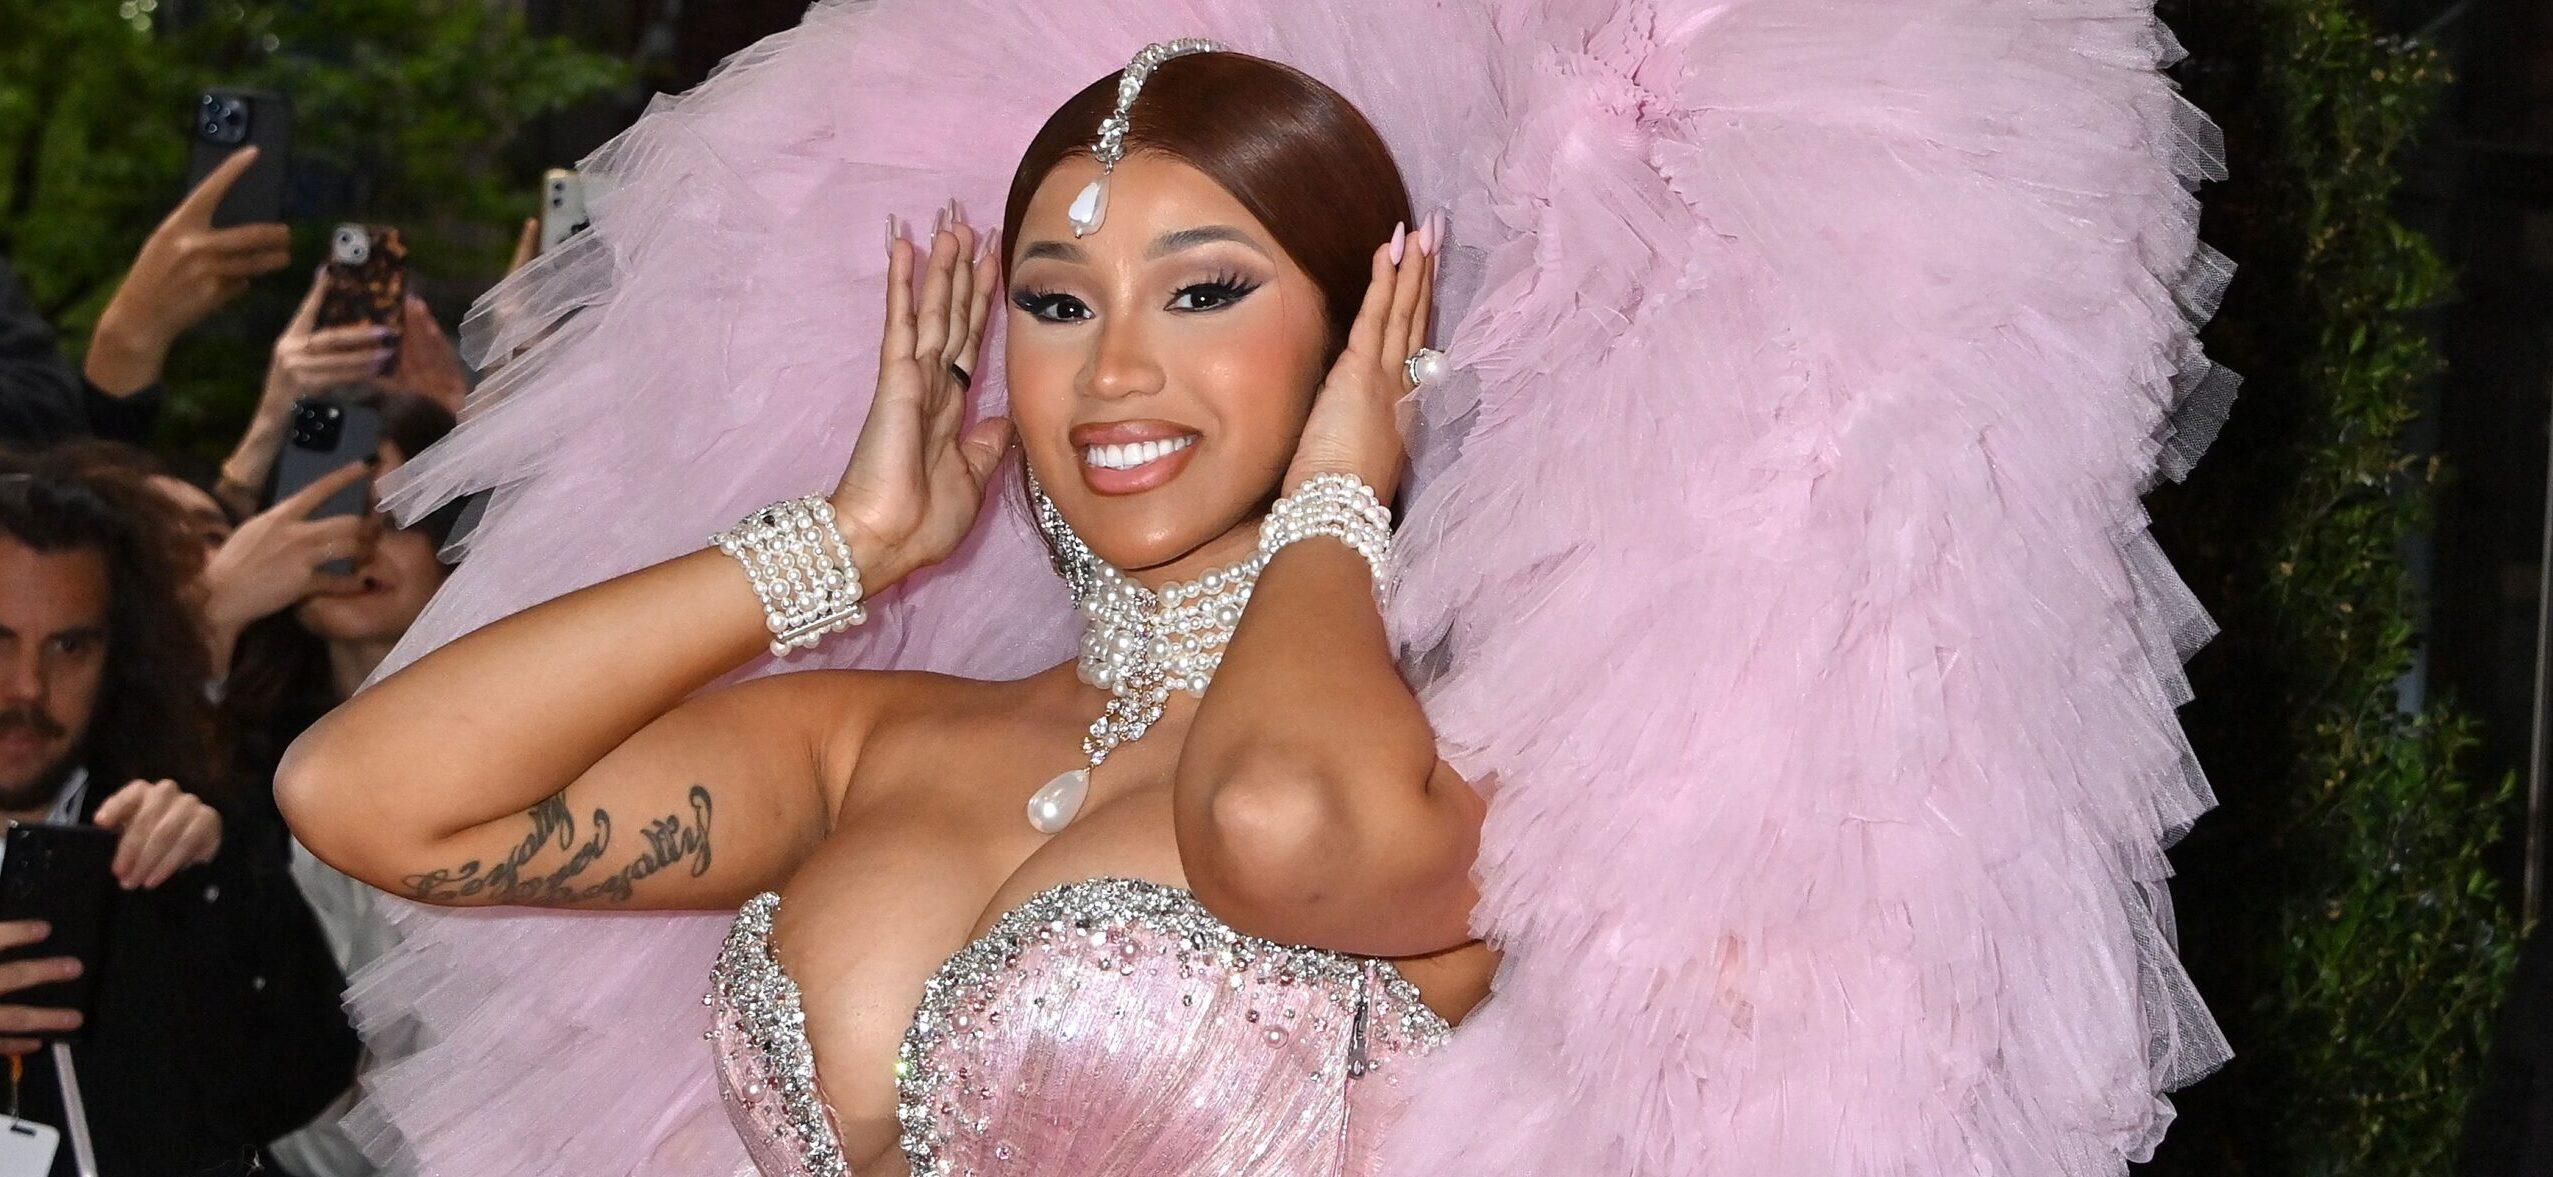 Nicki Minaj Continues To Serve Looks In Chanel Outfit - The Blast